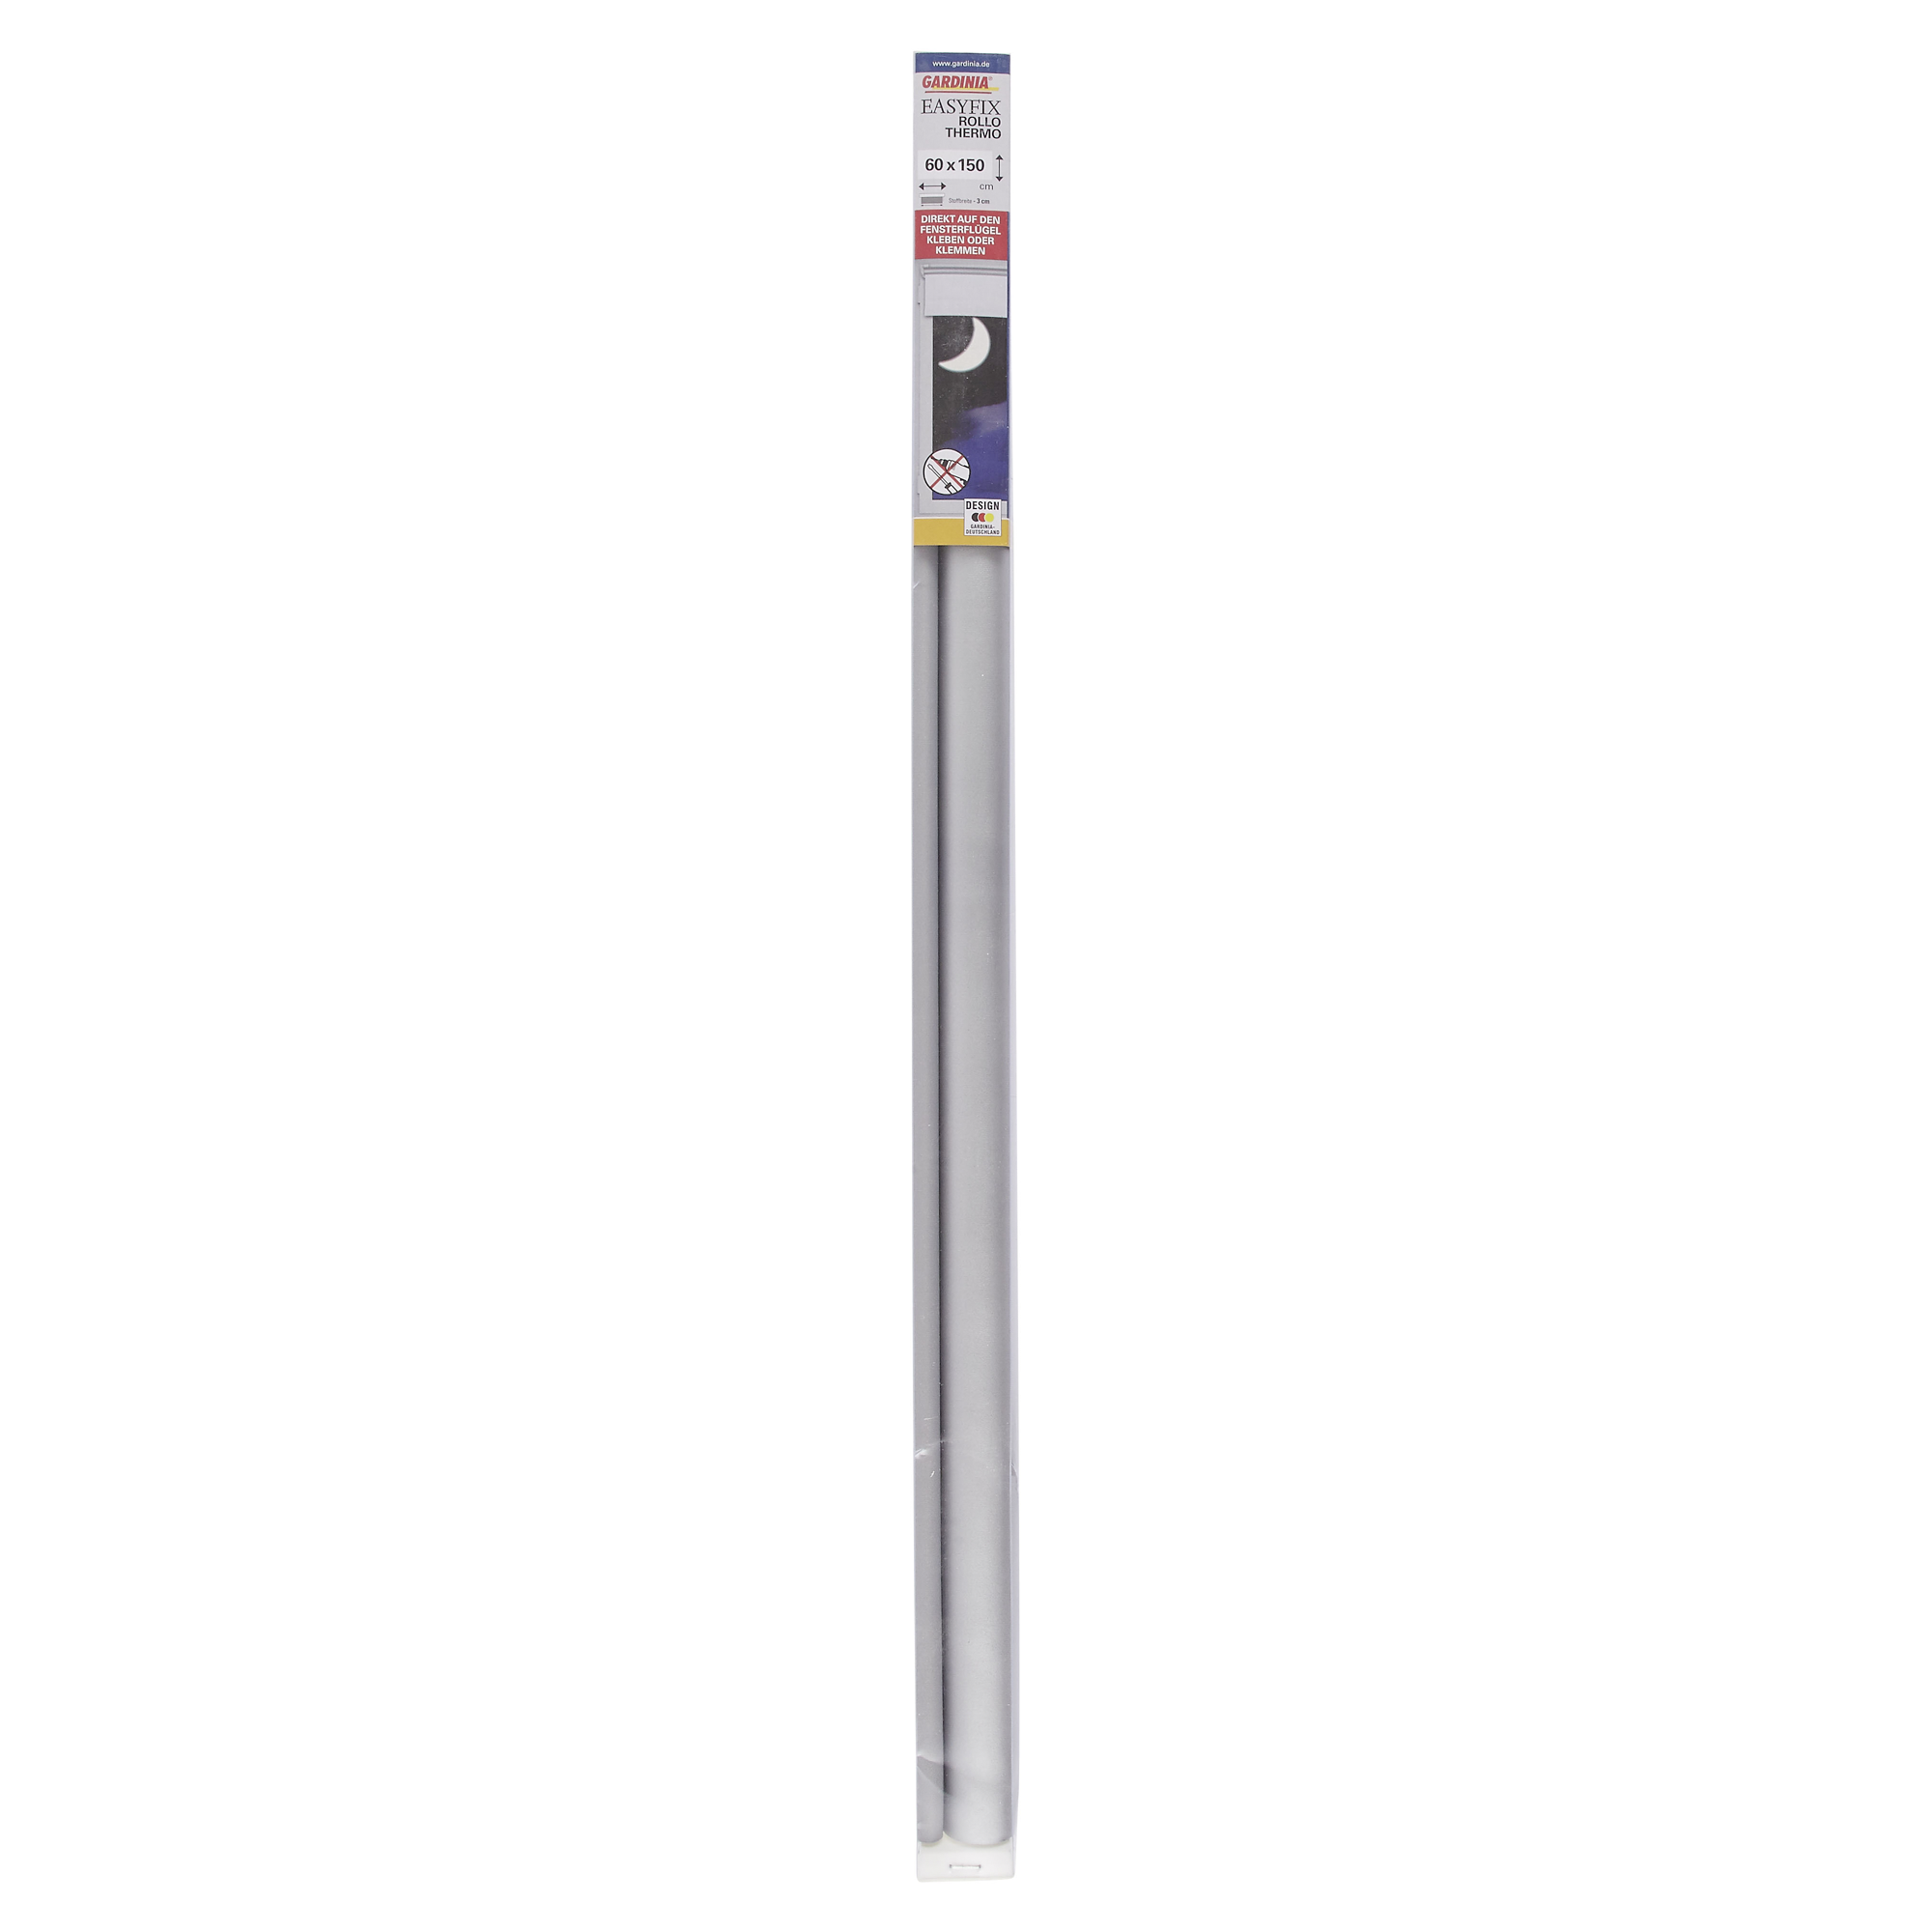 EasyFix Rollo 'Thermo energiesparend' grau 60 x 150 cm + product picture